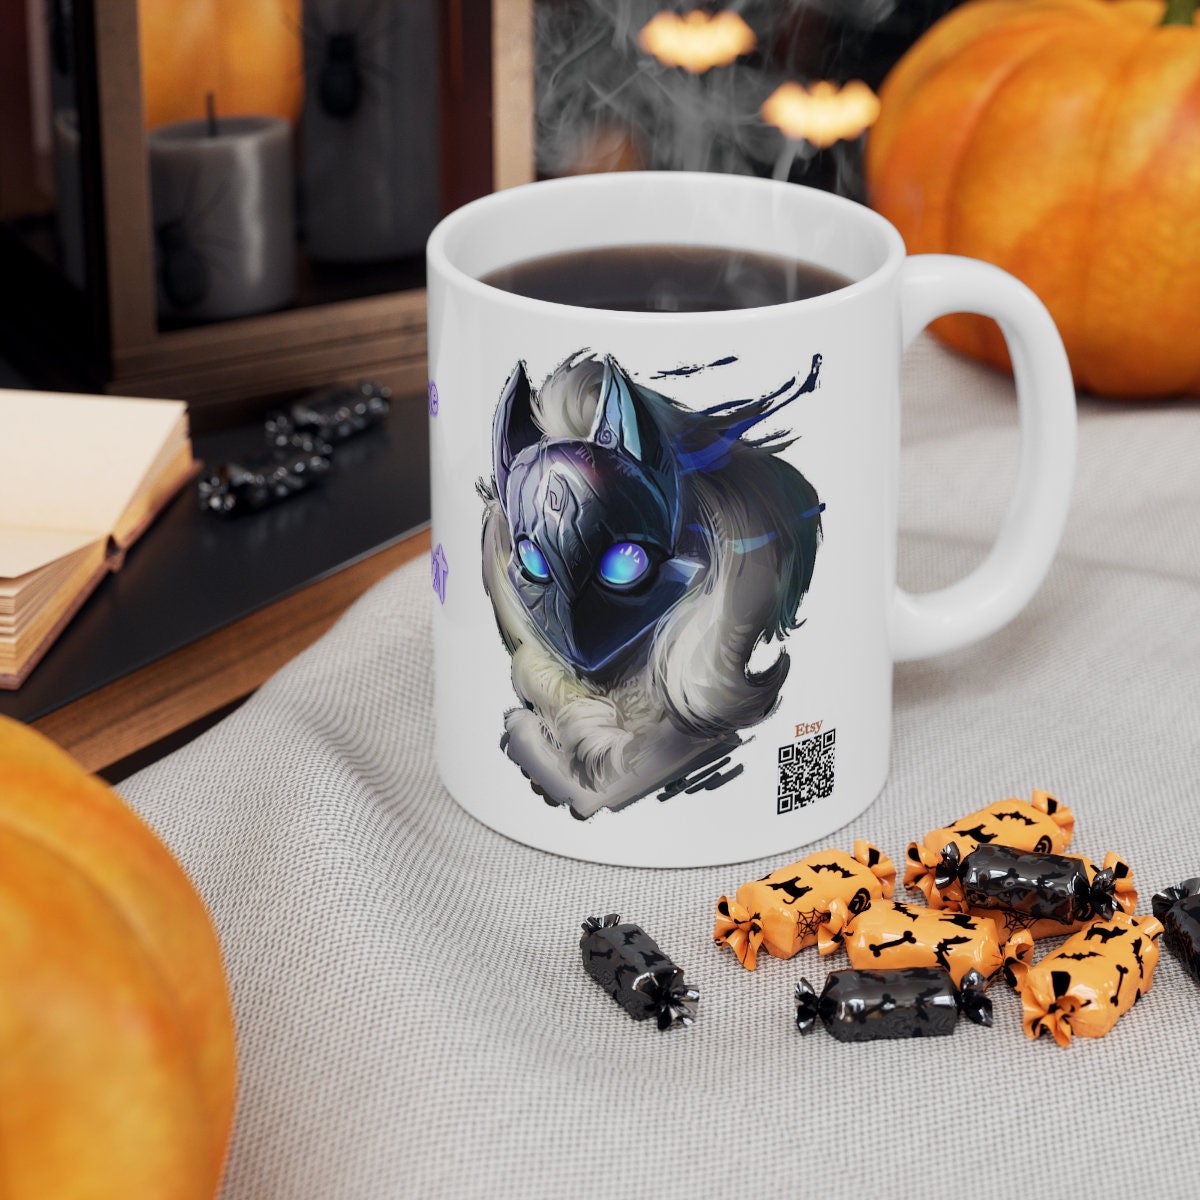 Jinx Kindred Teemo Miss Fortune Corki Jhin Ezreal League Of Legends MARKSMEN SERIES 3 Lol Personalizable Mug  Arcane Collections - League of Legends Fan Store